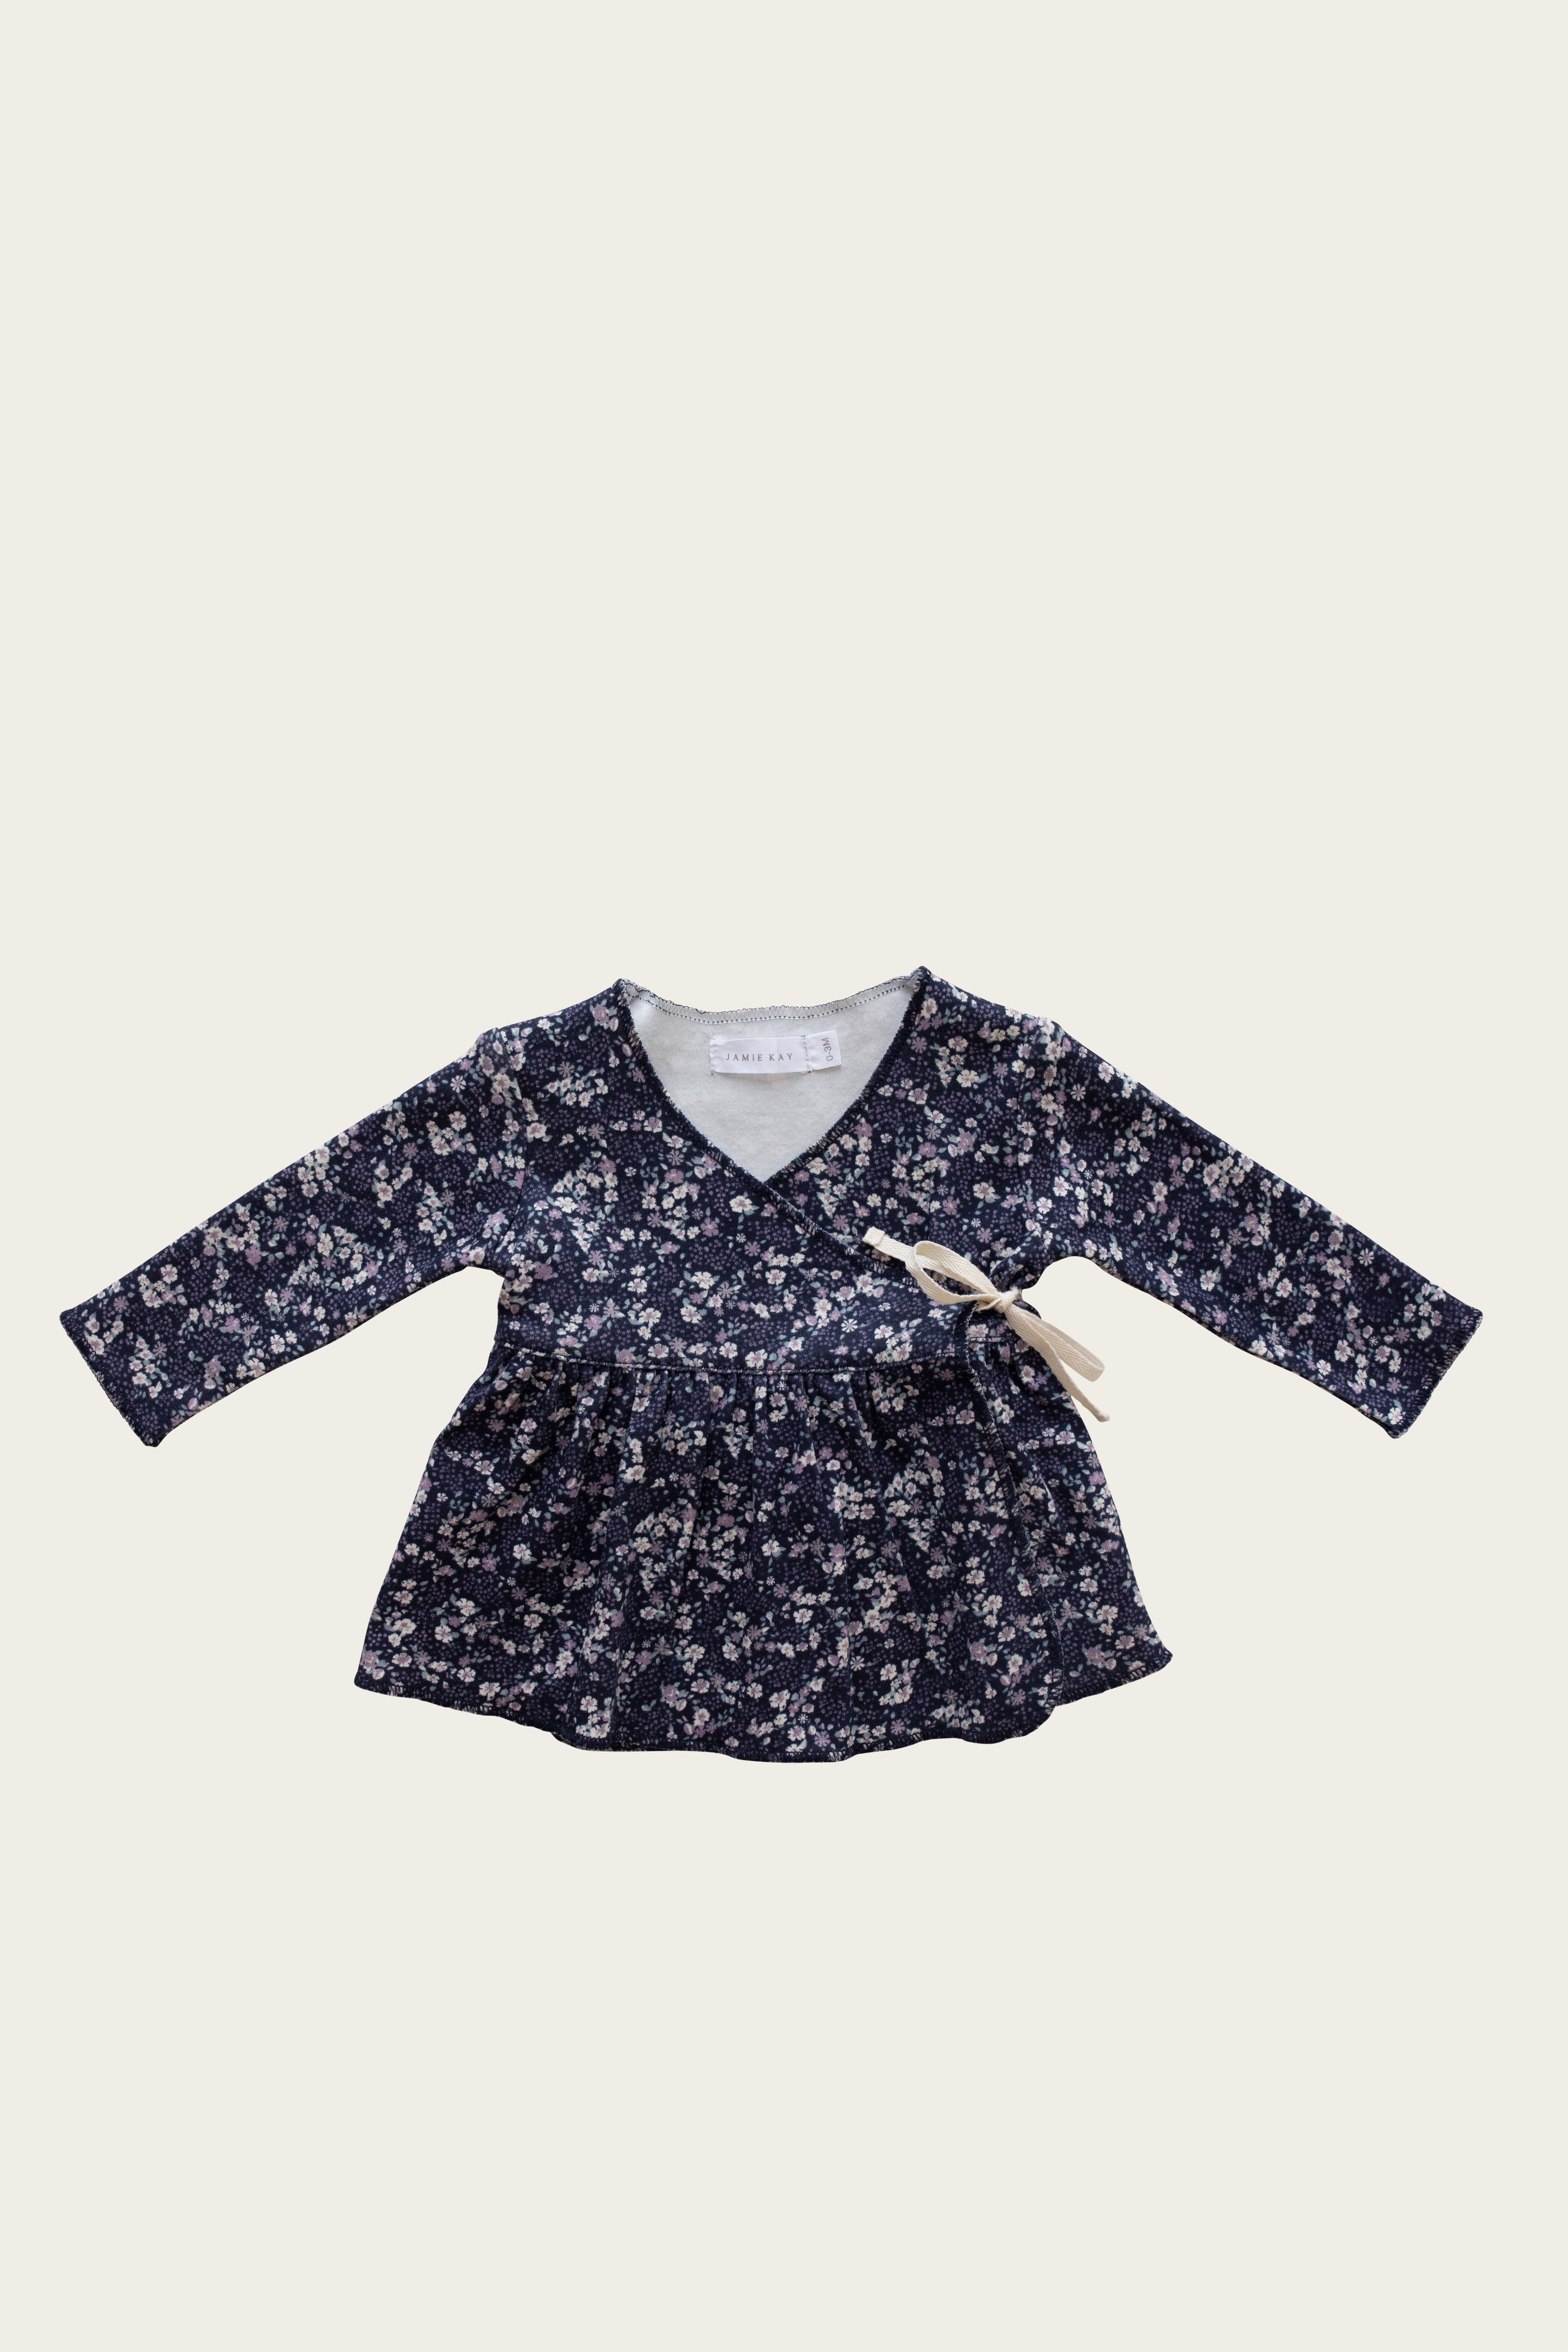 Jamie Kay | | Blueberry Wrap Barn Chic Cotton Floral Boutique Organic Top